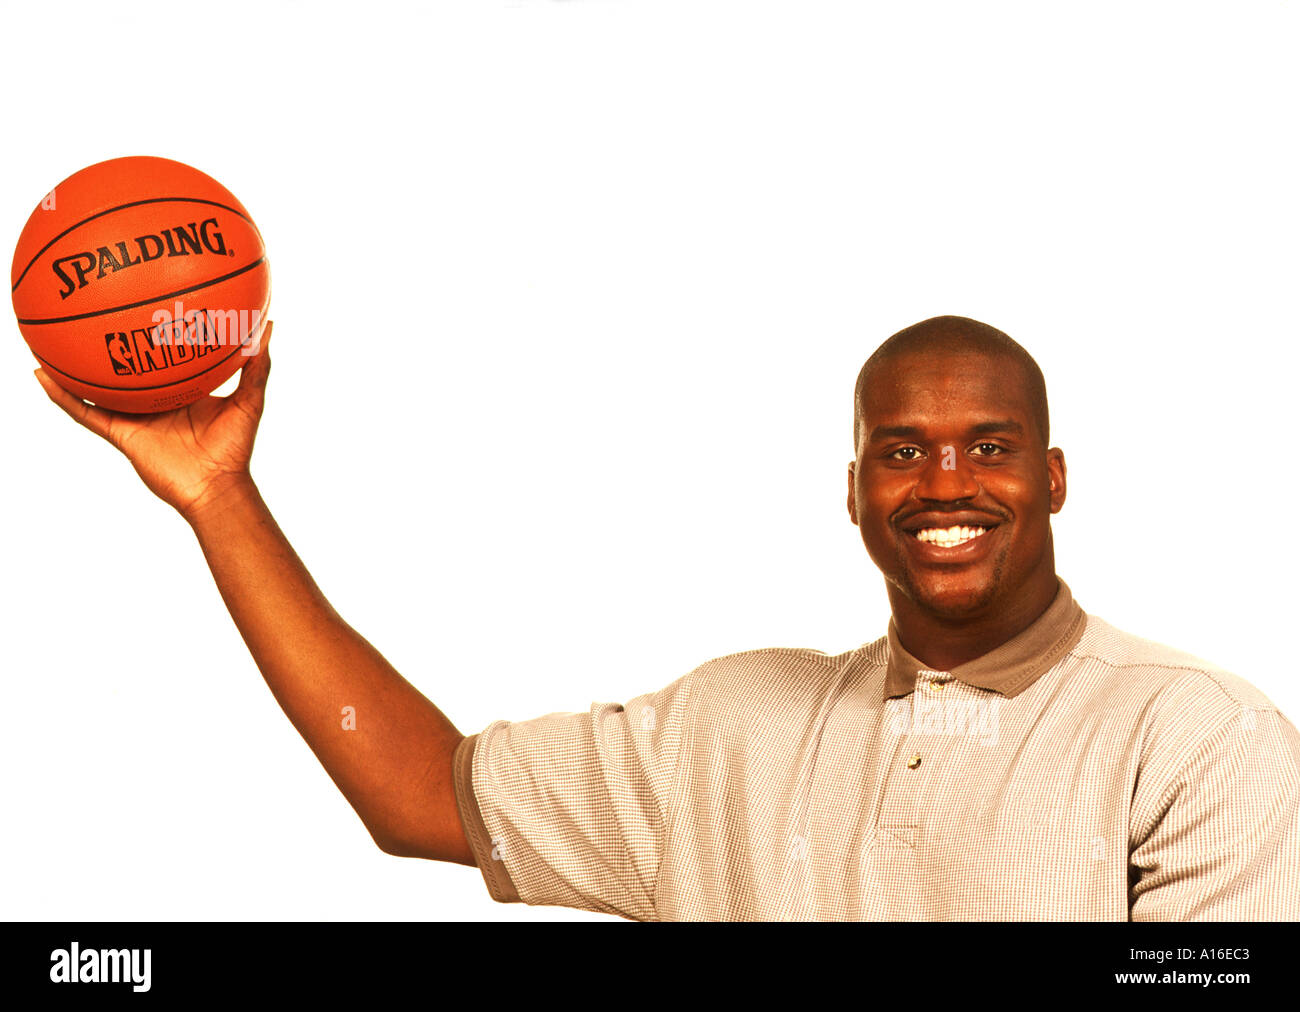 Shaquille ONeal Basketball superstar Stock Photo - Alamy